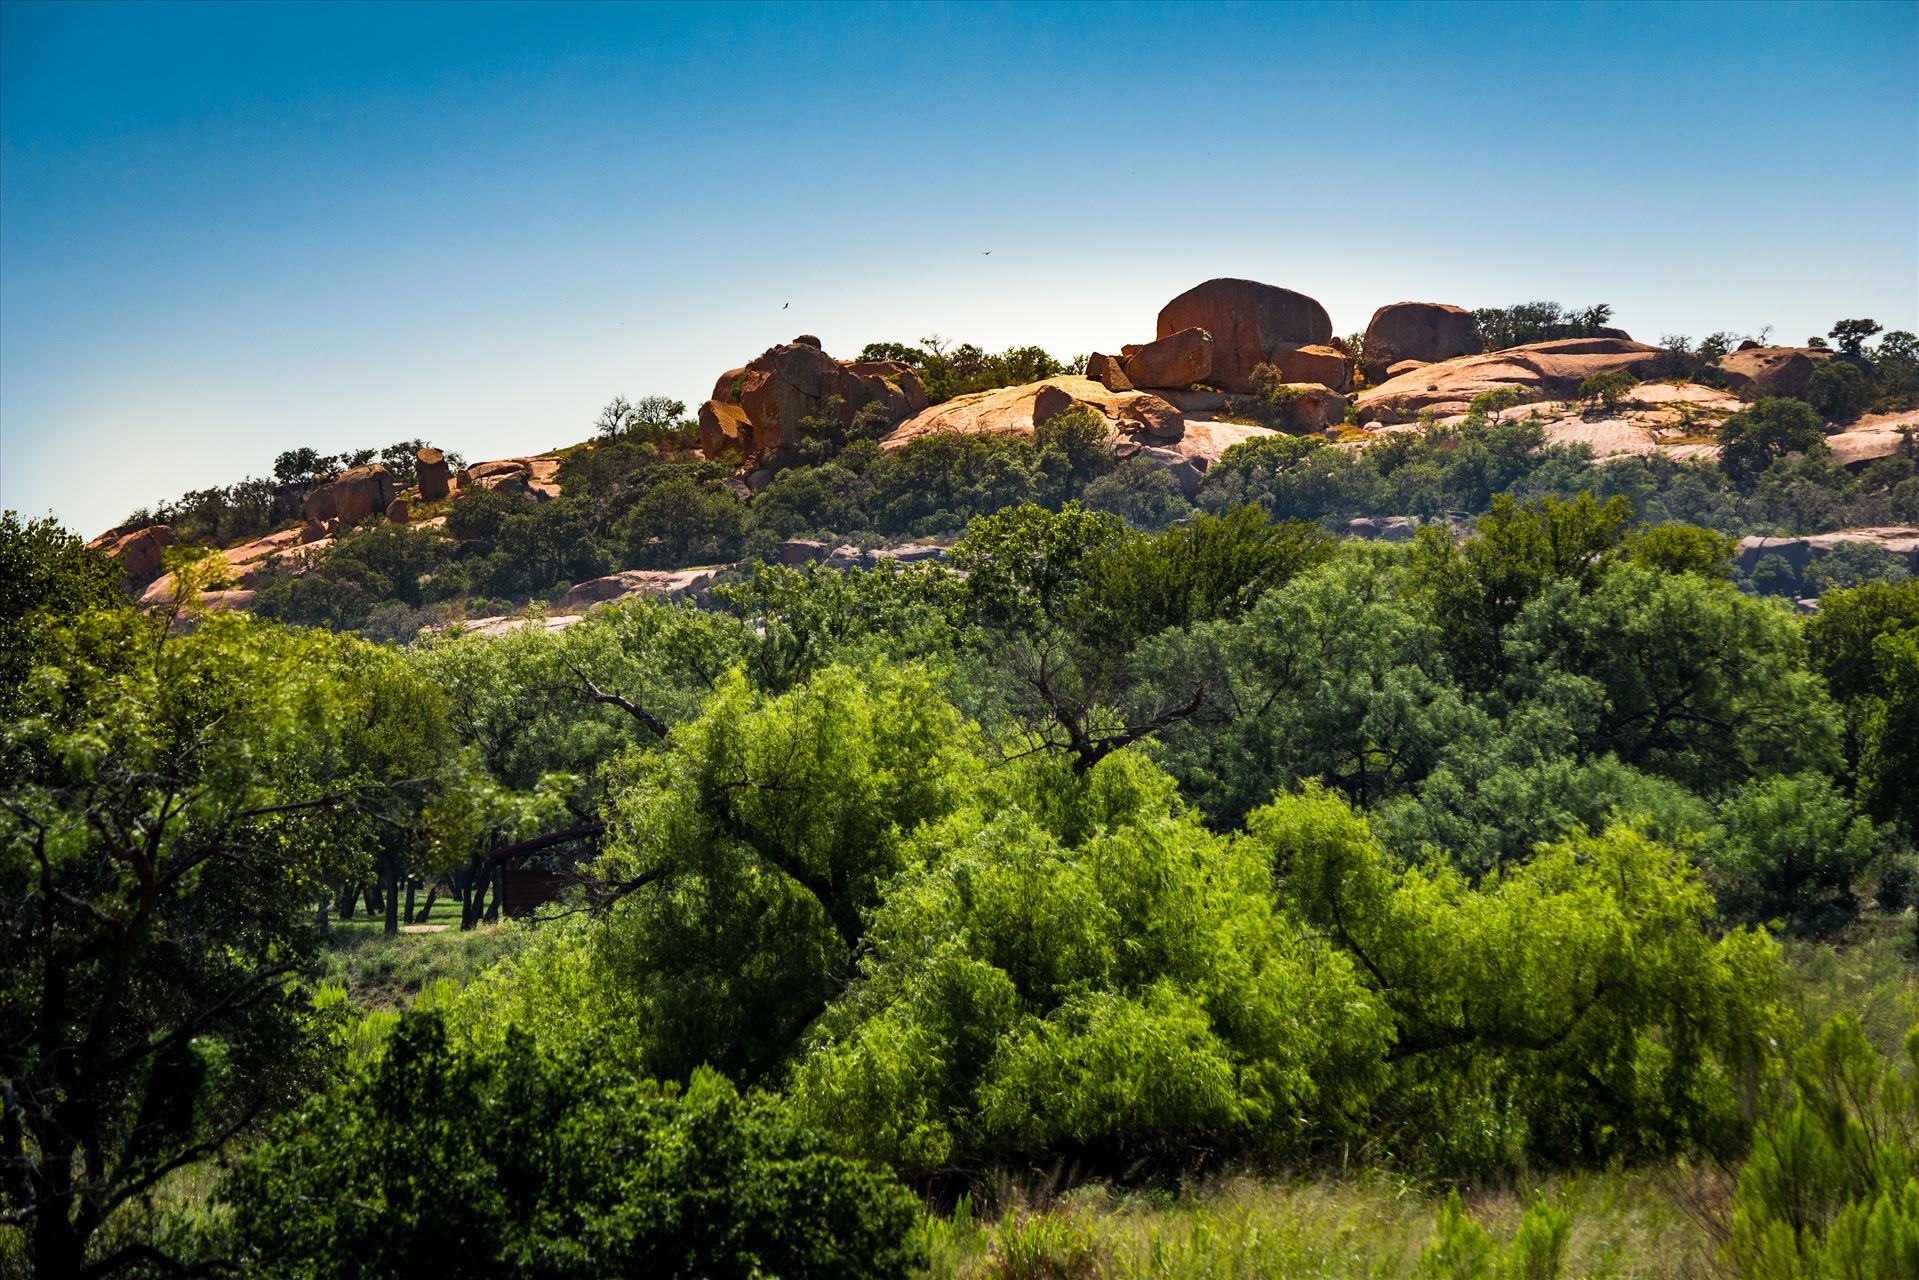 20130723-Enchanted Rock-DSLR-002.jpg  by Charles Smith Photography